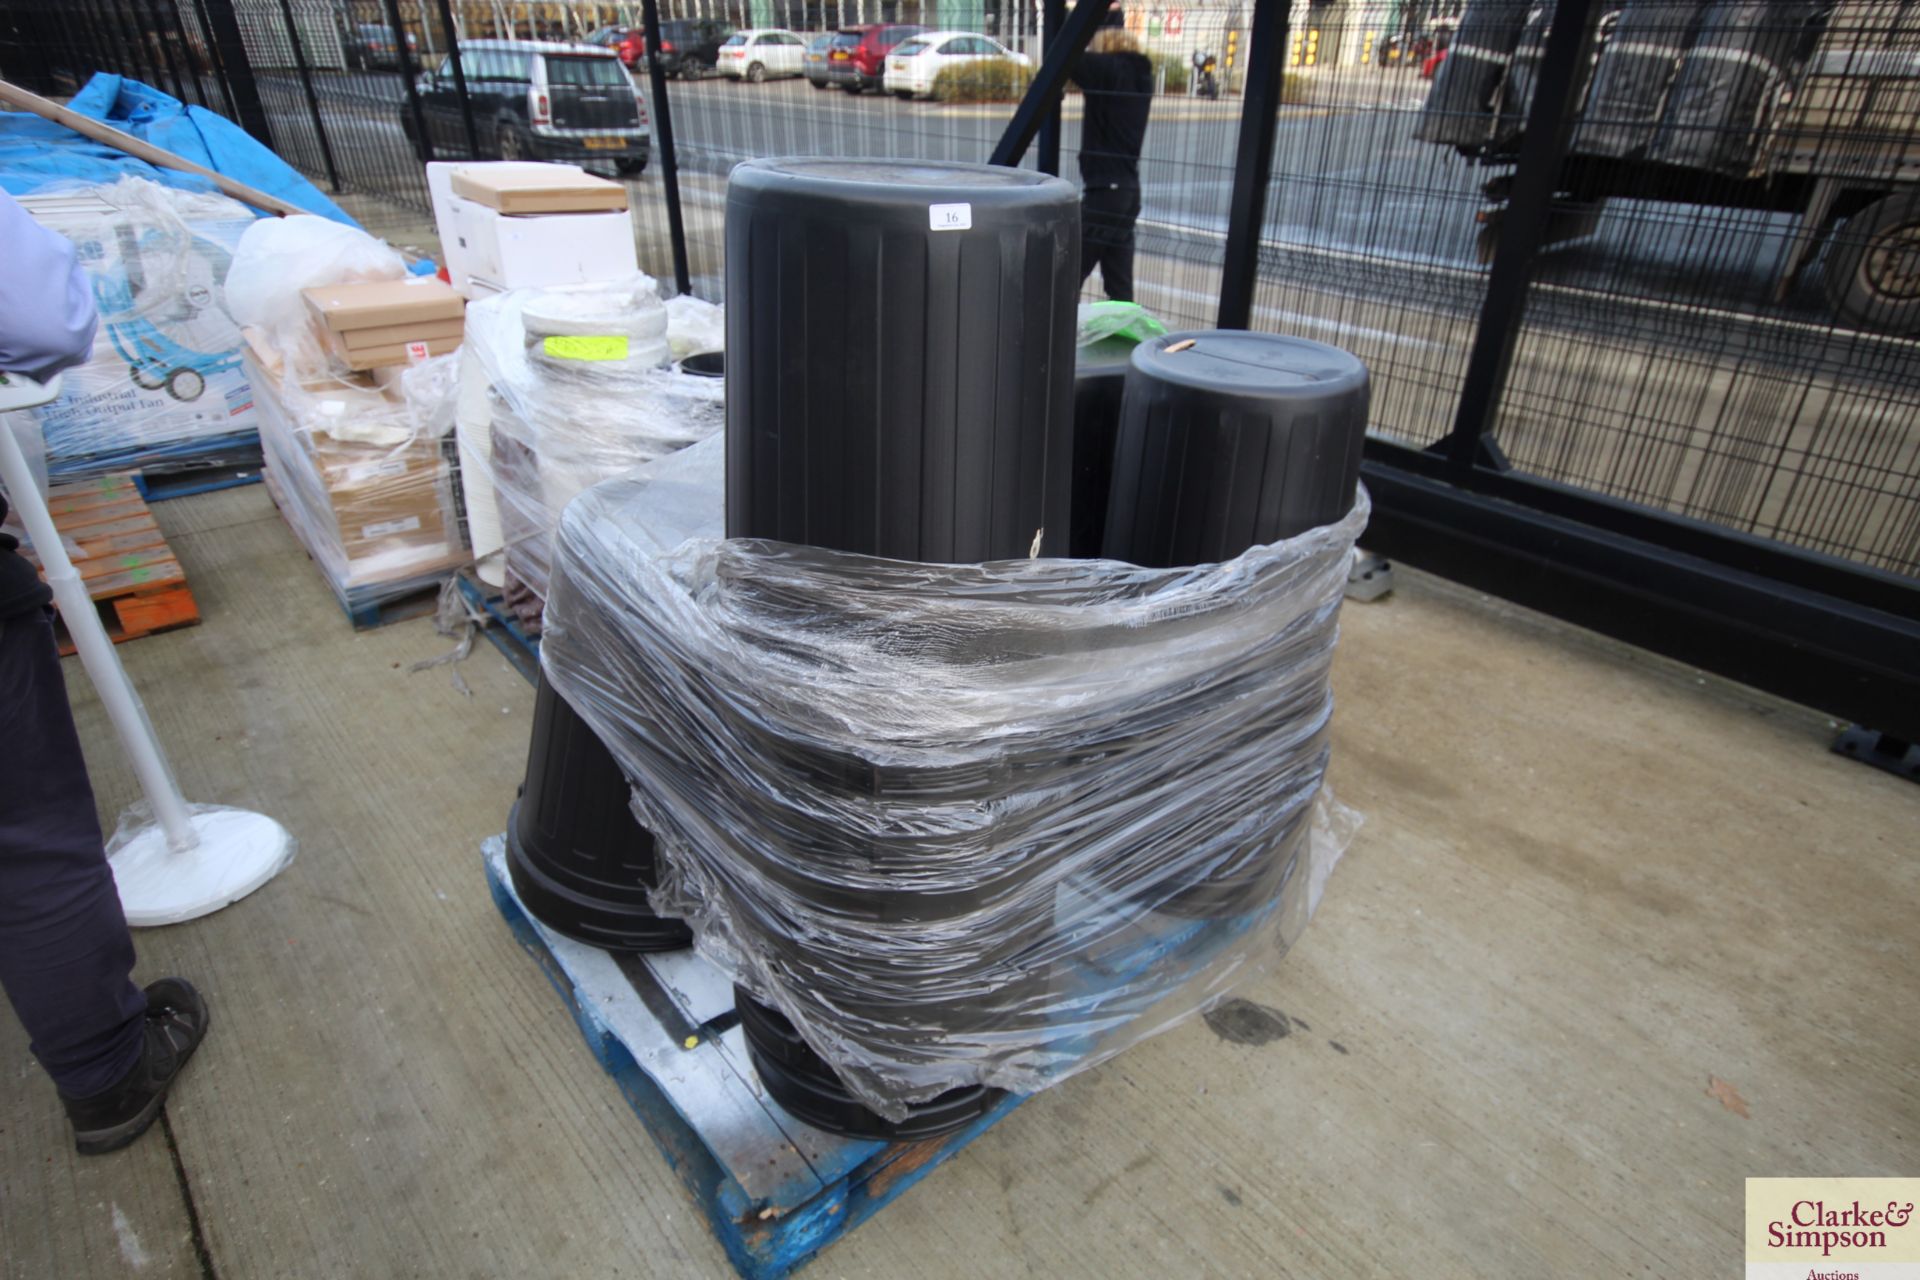 15x black plastic dustbins and some lids. V